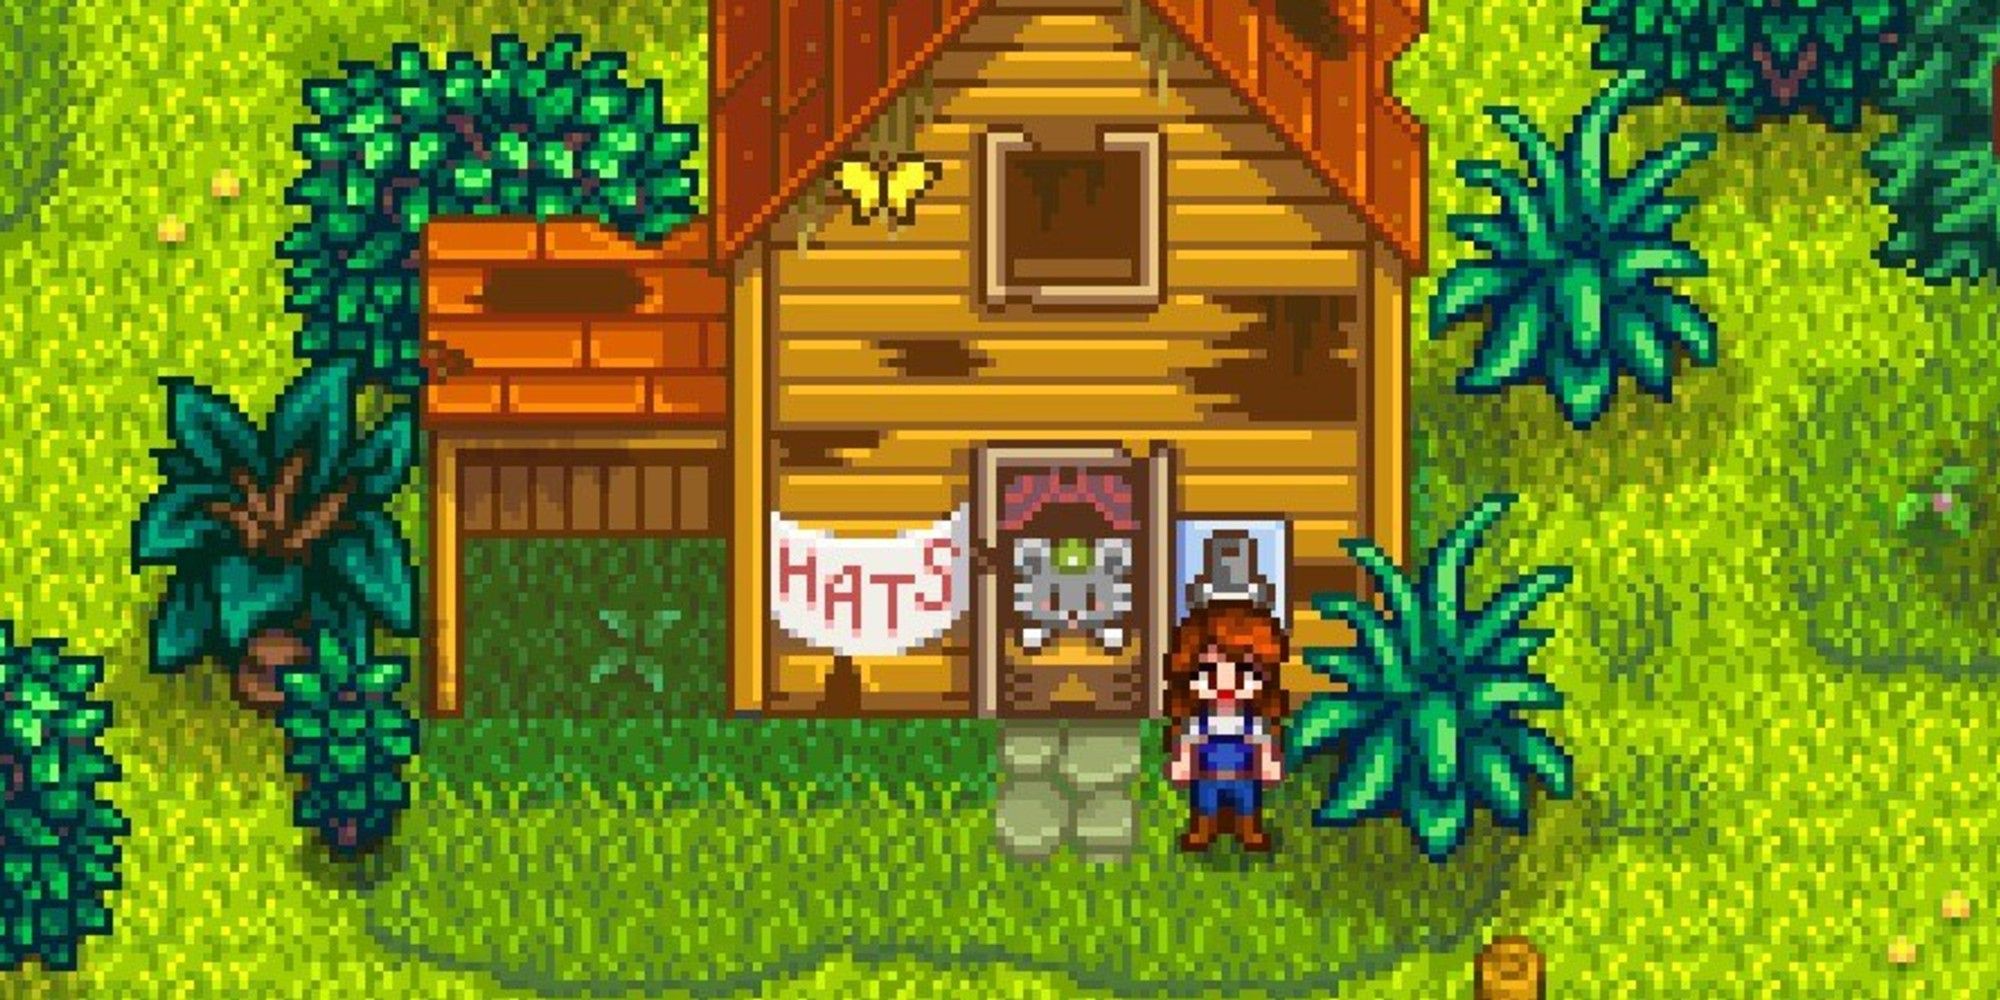 Stardew-valley-hat-mouse-featured-image.jpg